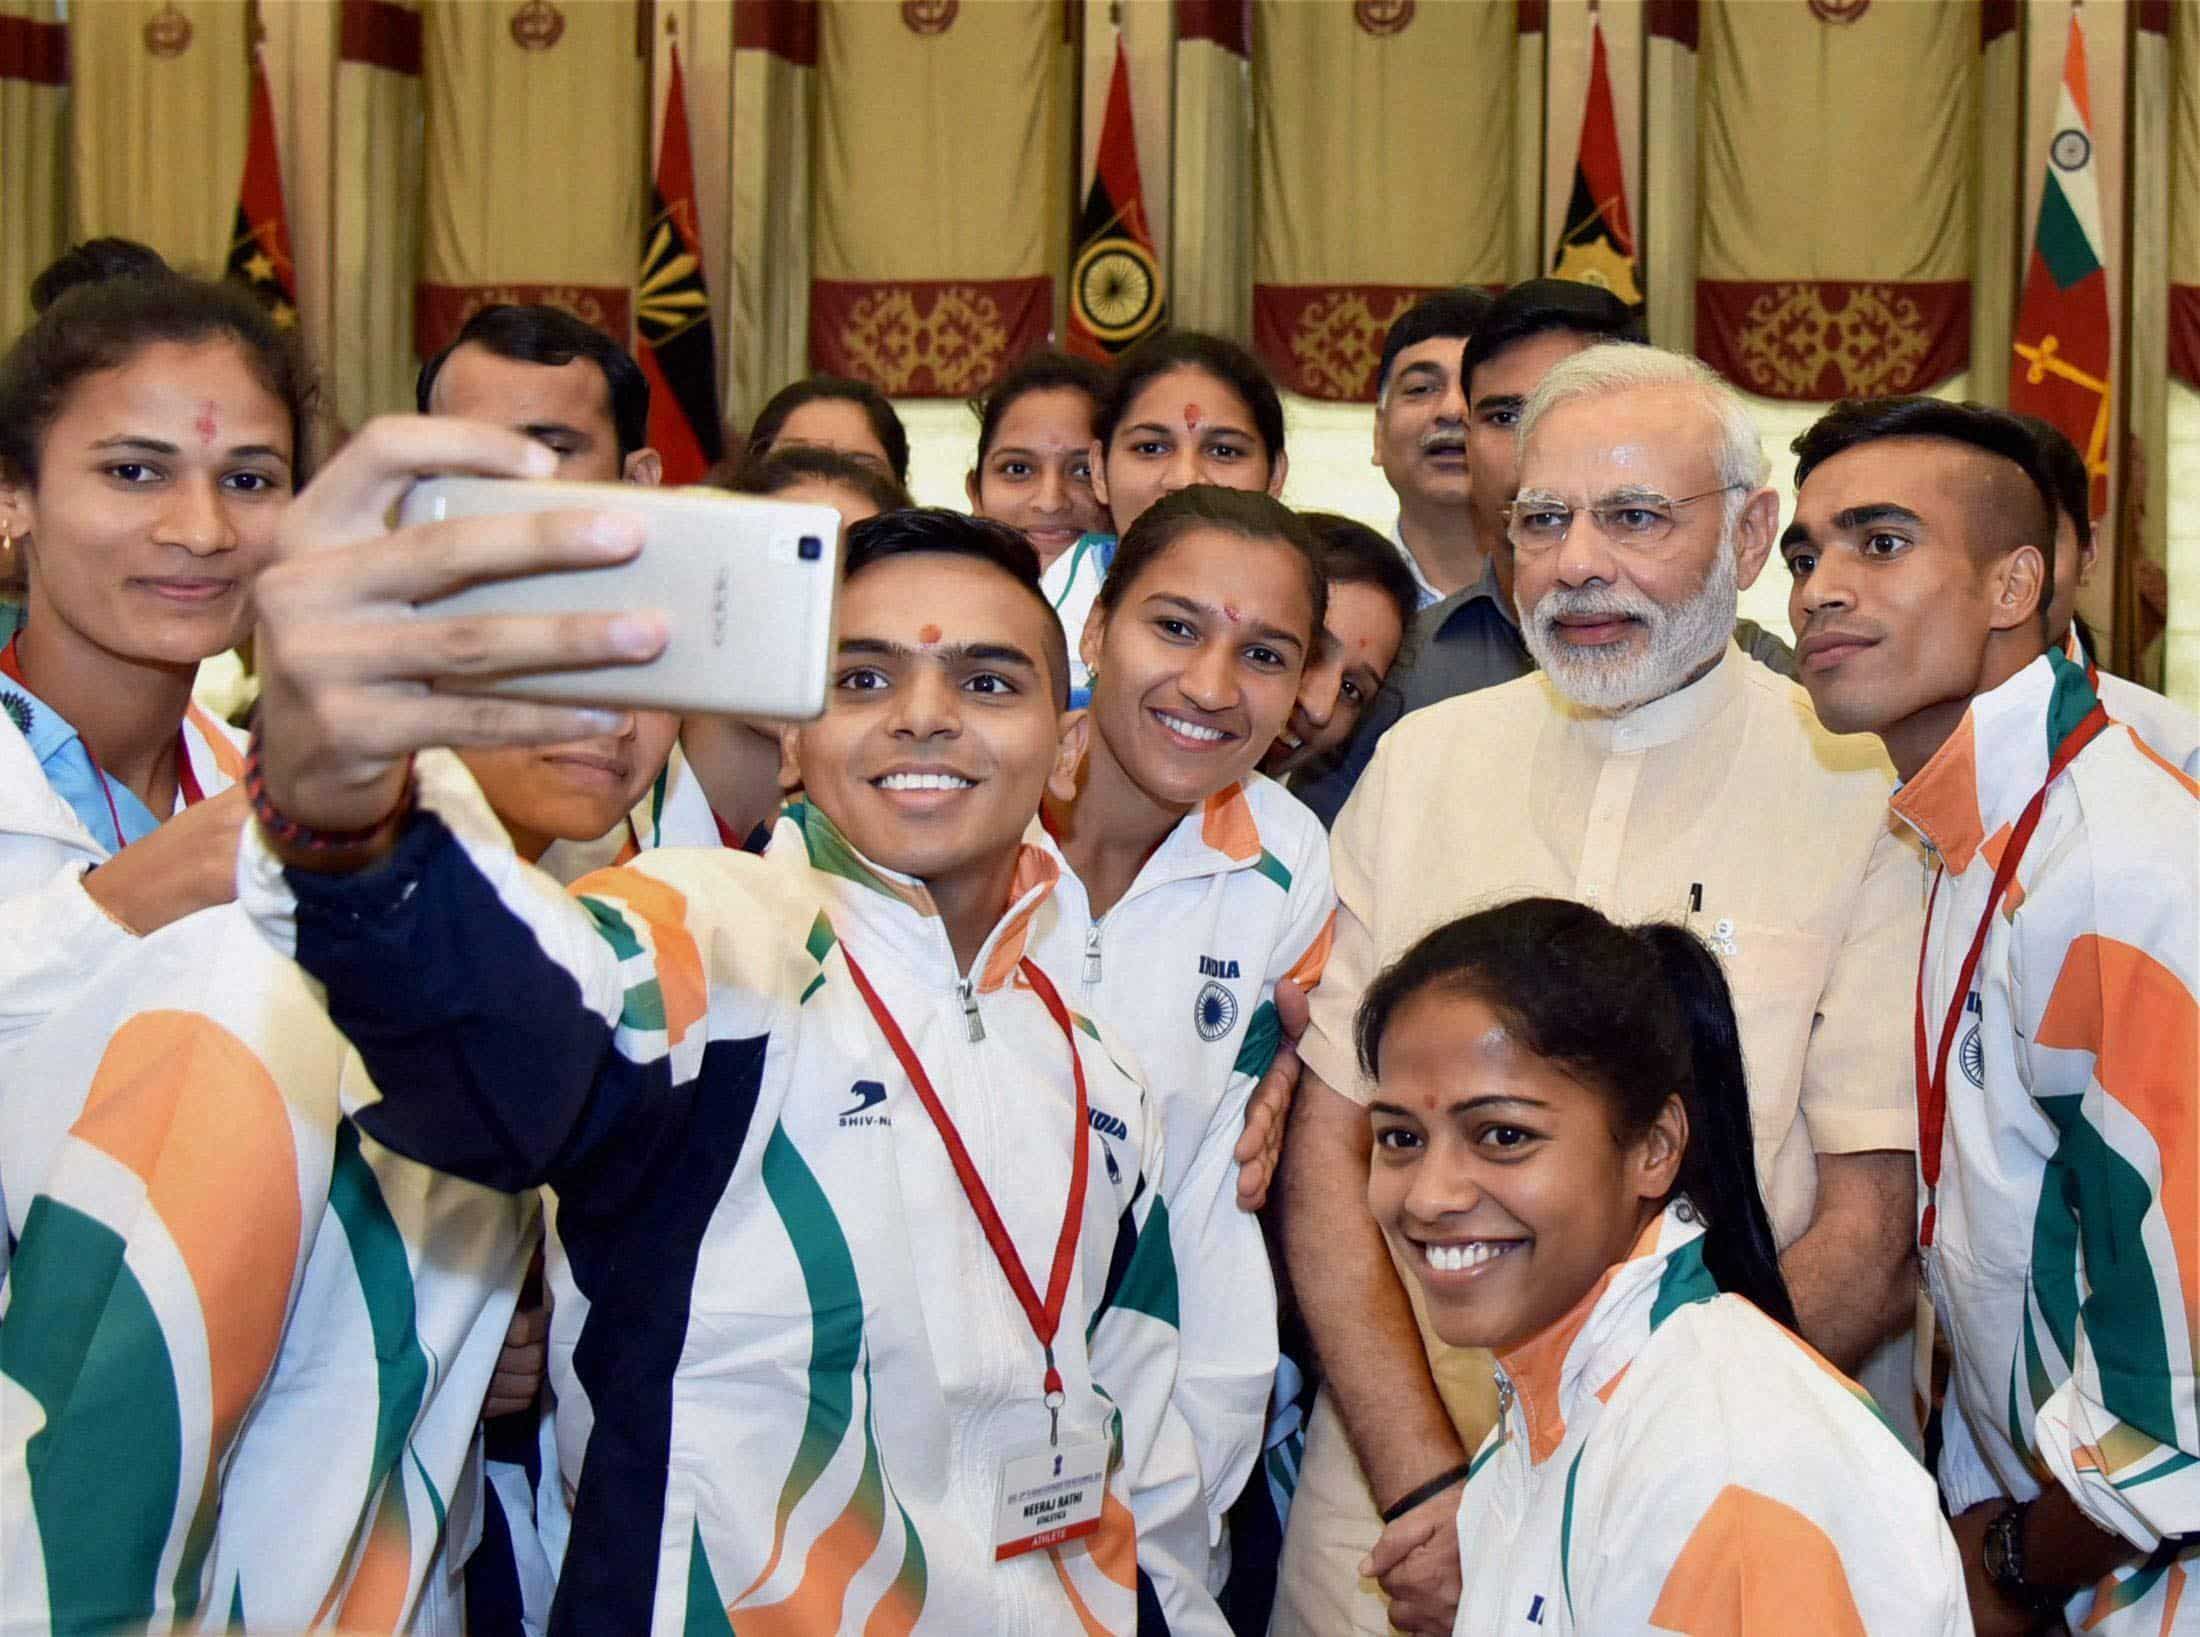 The group of athletes also indulged in a short selfie session with the Prime Minister at the send-off ceremony. PTI